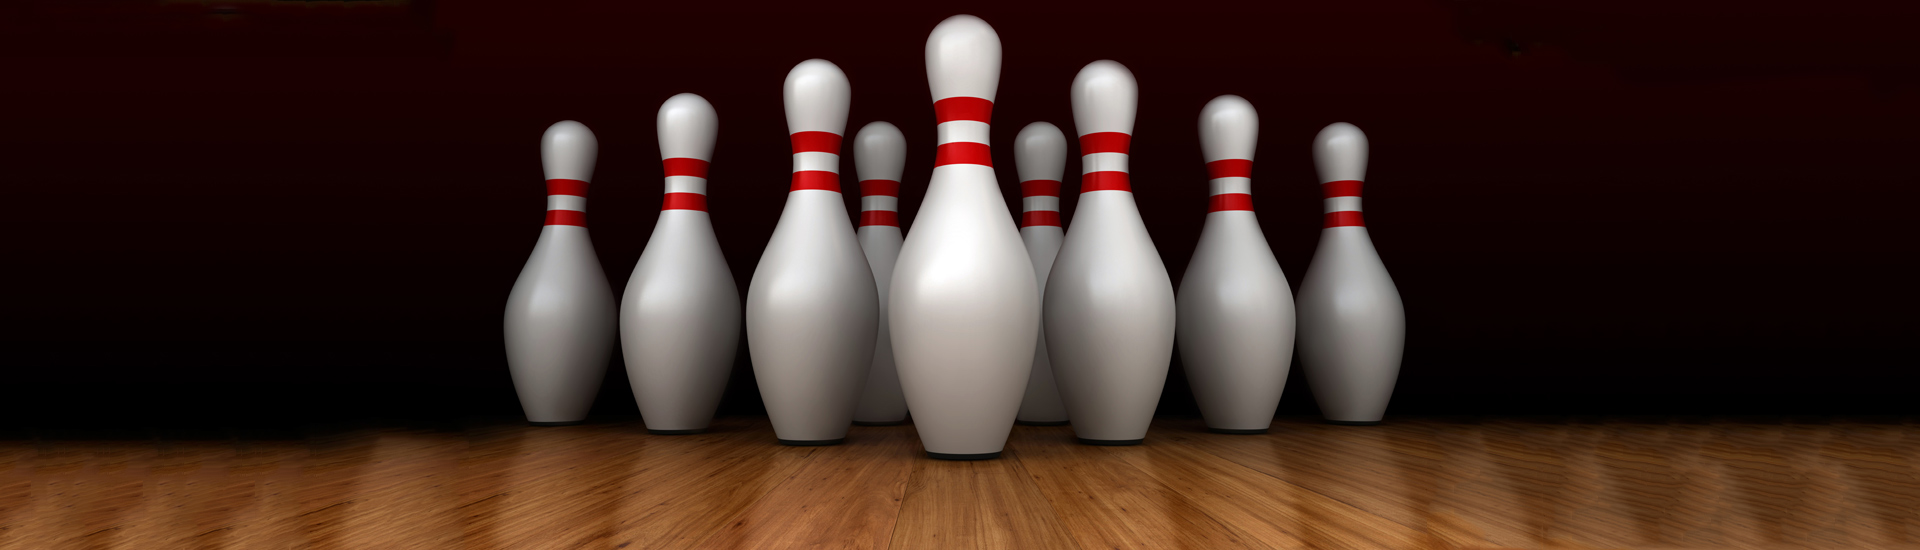 3d Render Of Bowling Pins